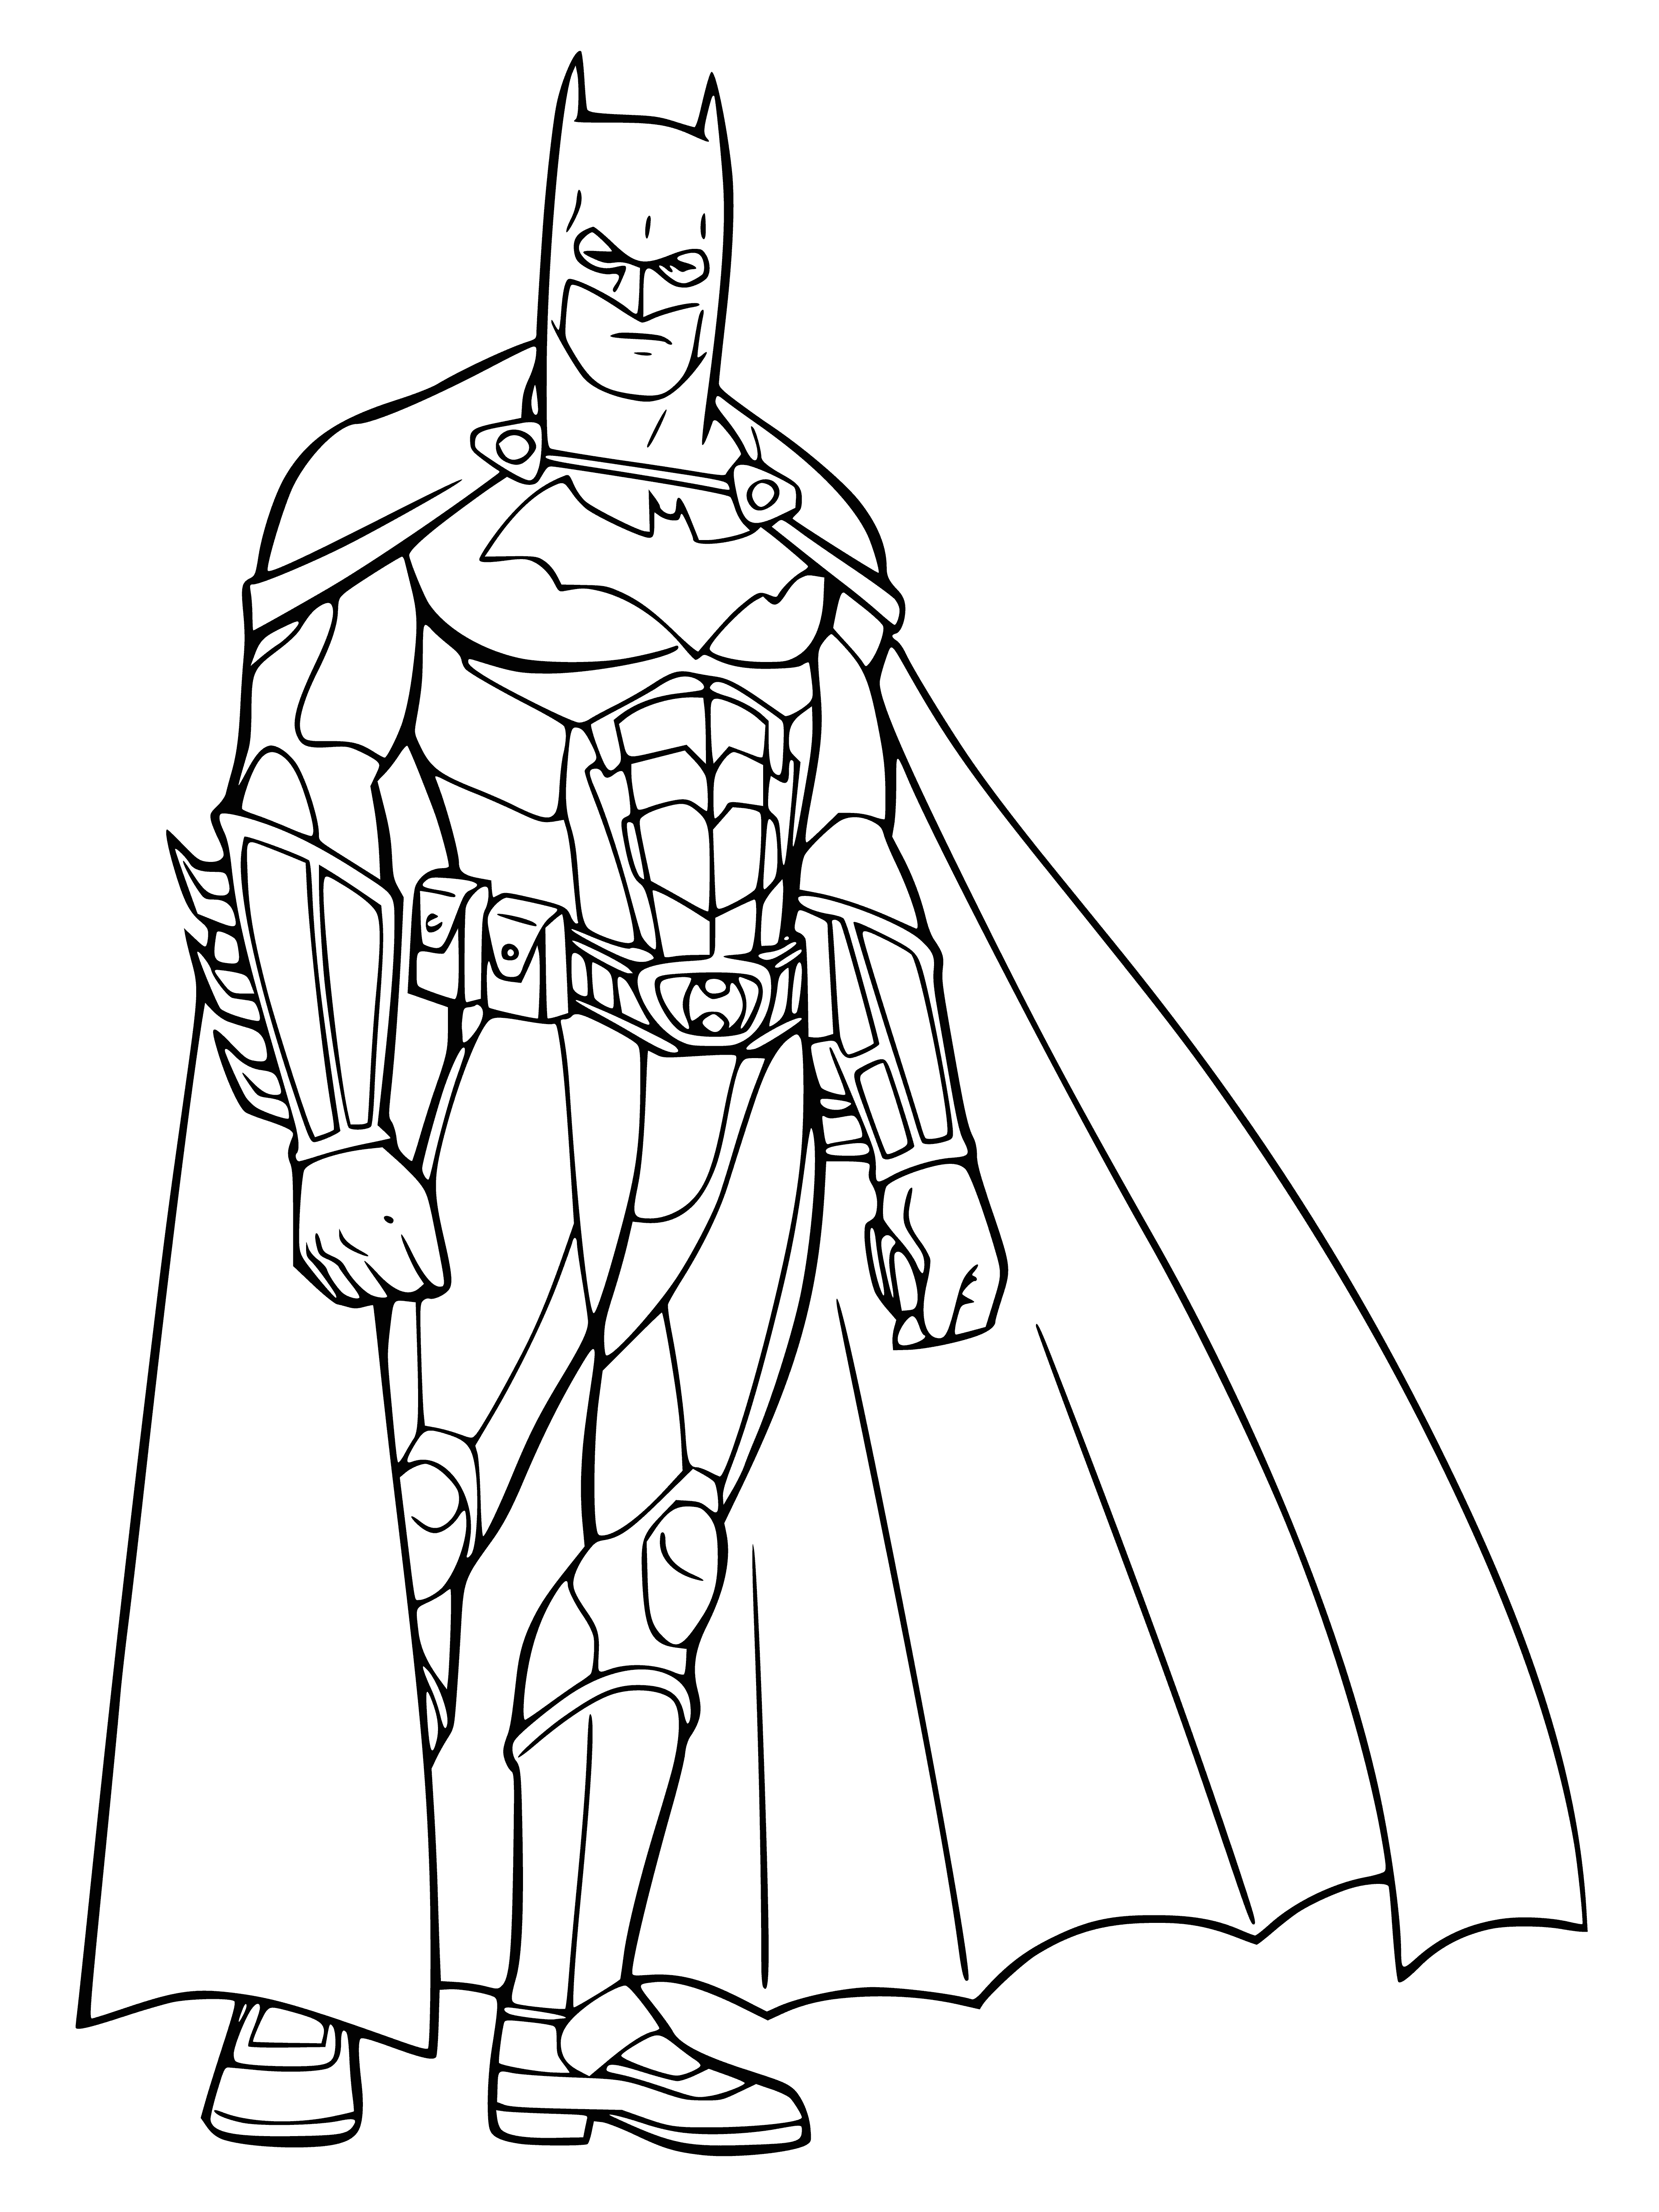 coloring page: A man stands screaming in a suit and black cape in the wind and rain, mask covering his eyes.